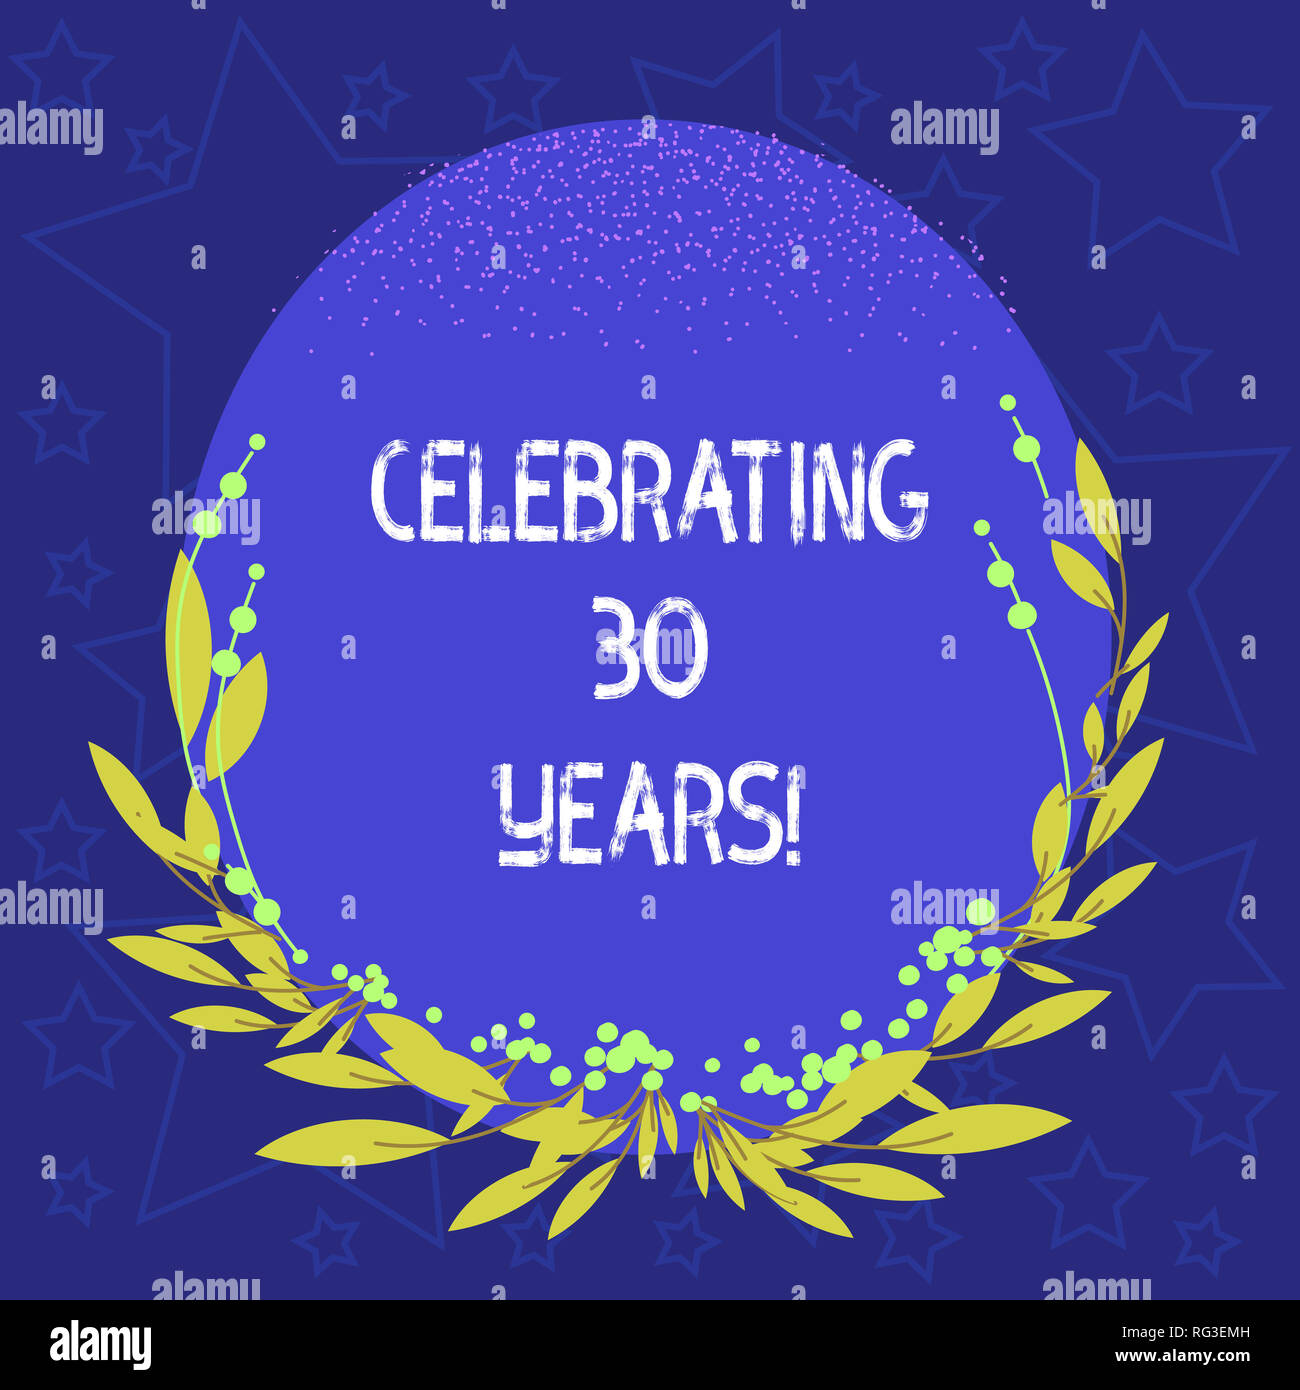 celebrating 30 years in business